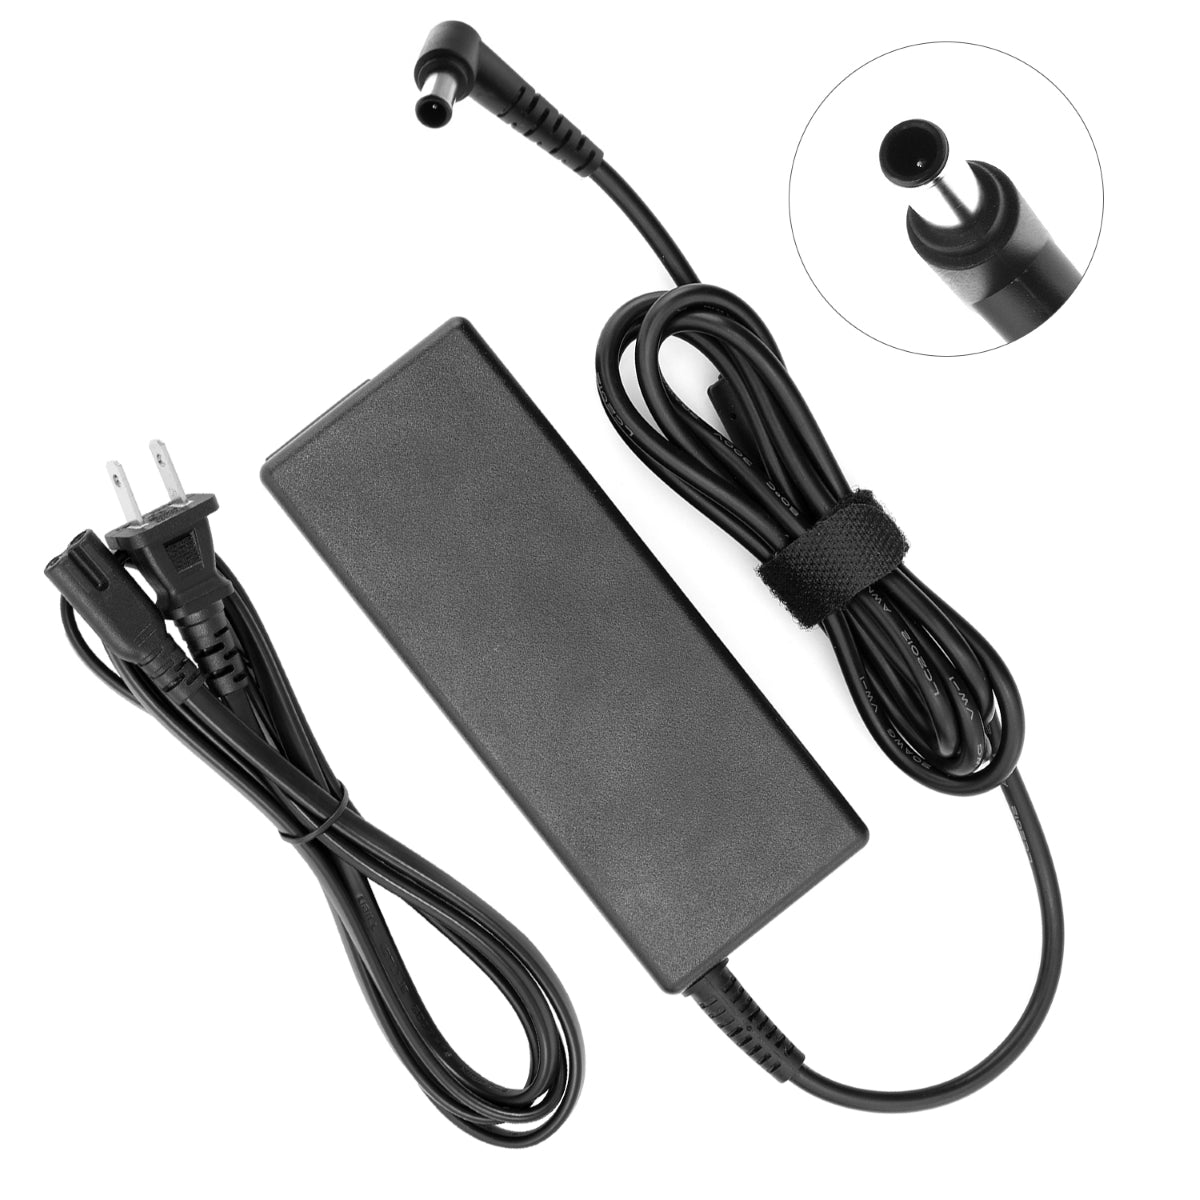 AC Adapter Power Supply for Samsung LS24F350FHNXZA Monitor